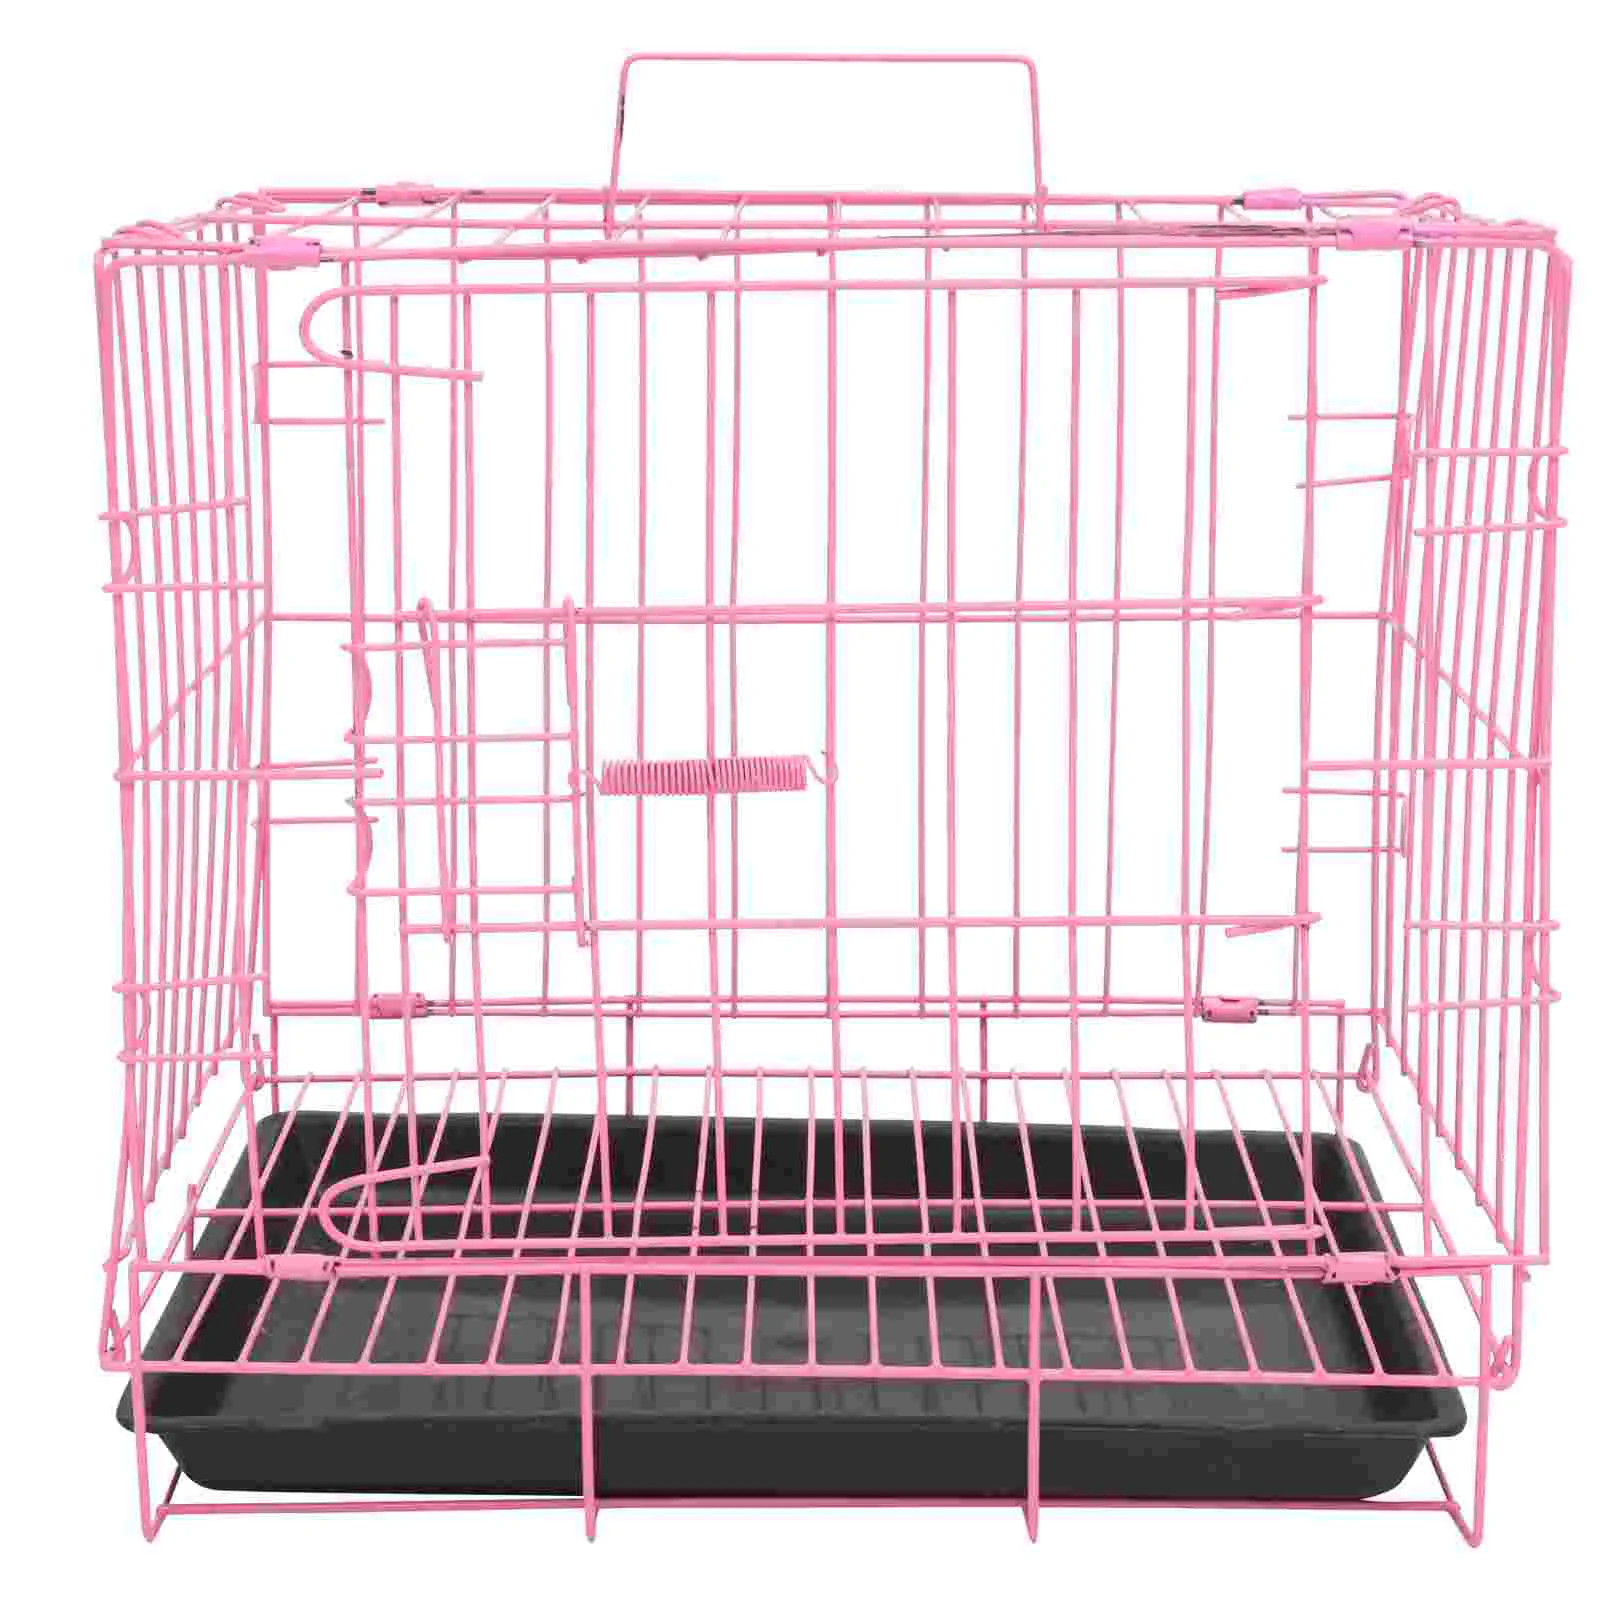 

1Pc Folding Metal Crates, Pets Crate Kennel Cage Foldable Crate Equipped with Replacement Tray for Cat Rabbit| 35x26x34cm,